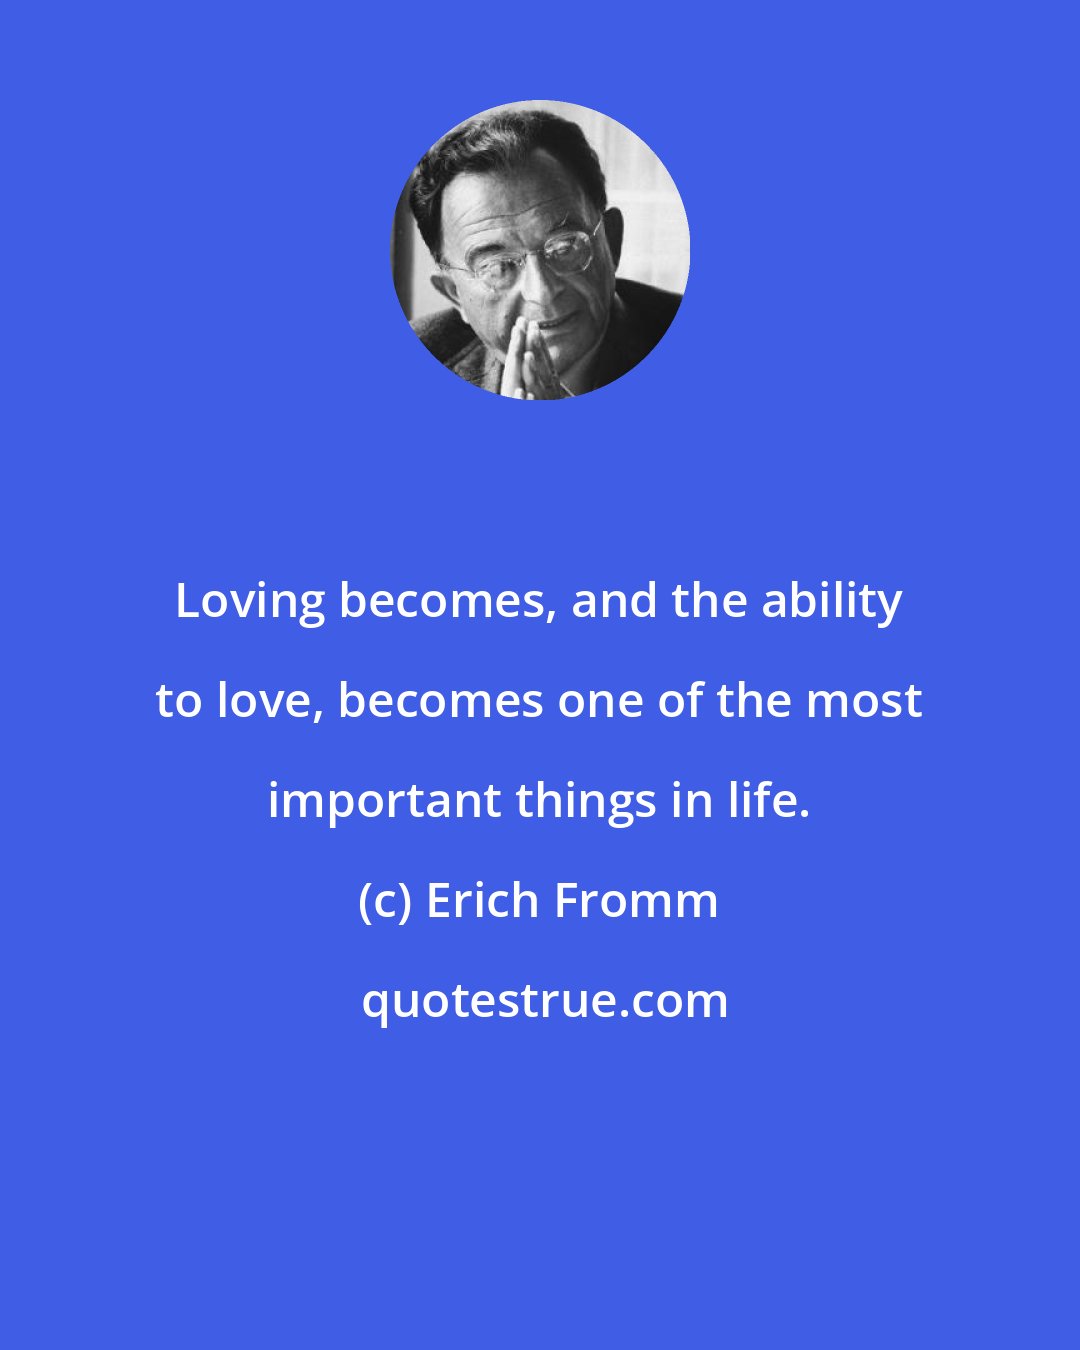 Erich Fromm: Loving becomes, and the ability to love, becomes one of the most important things in life.